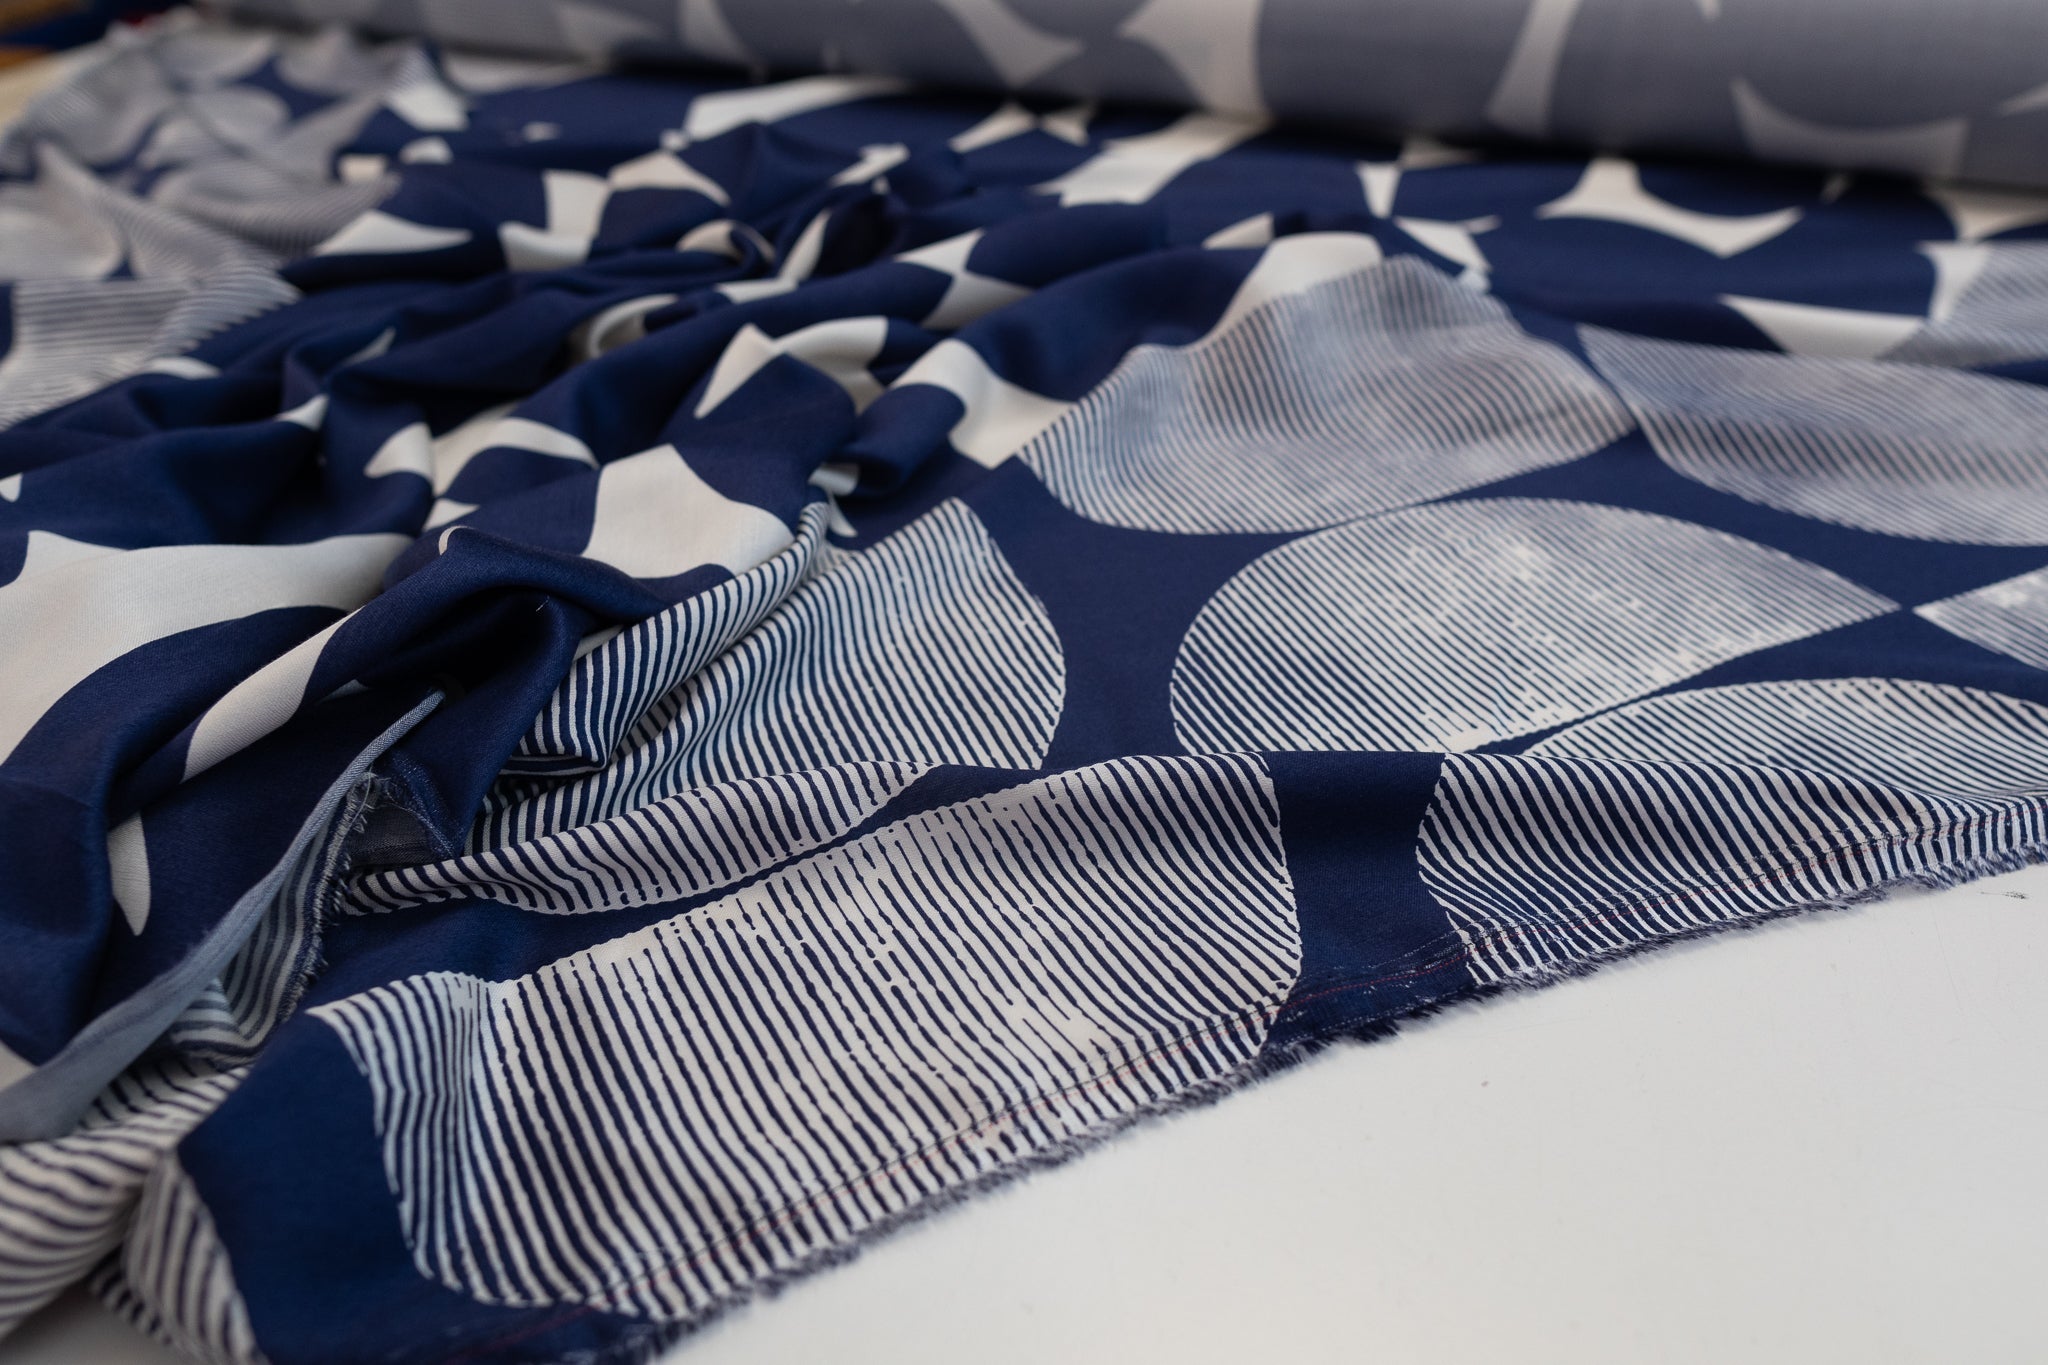 Blue In Circles and Stripes  - Viscose Satin